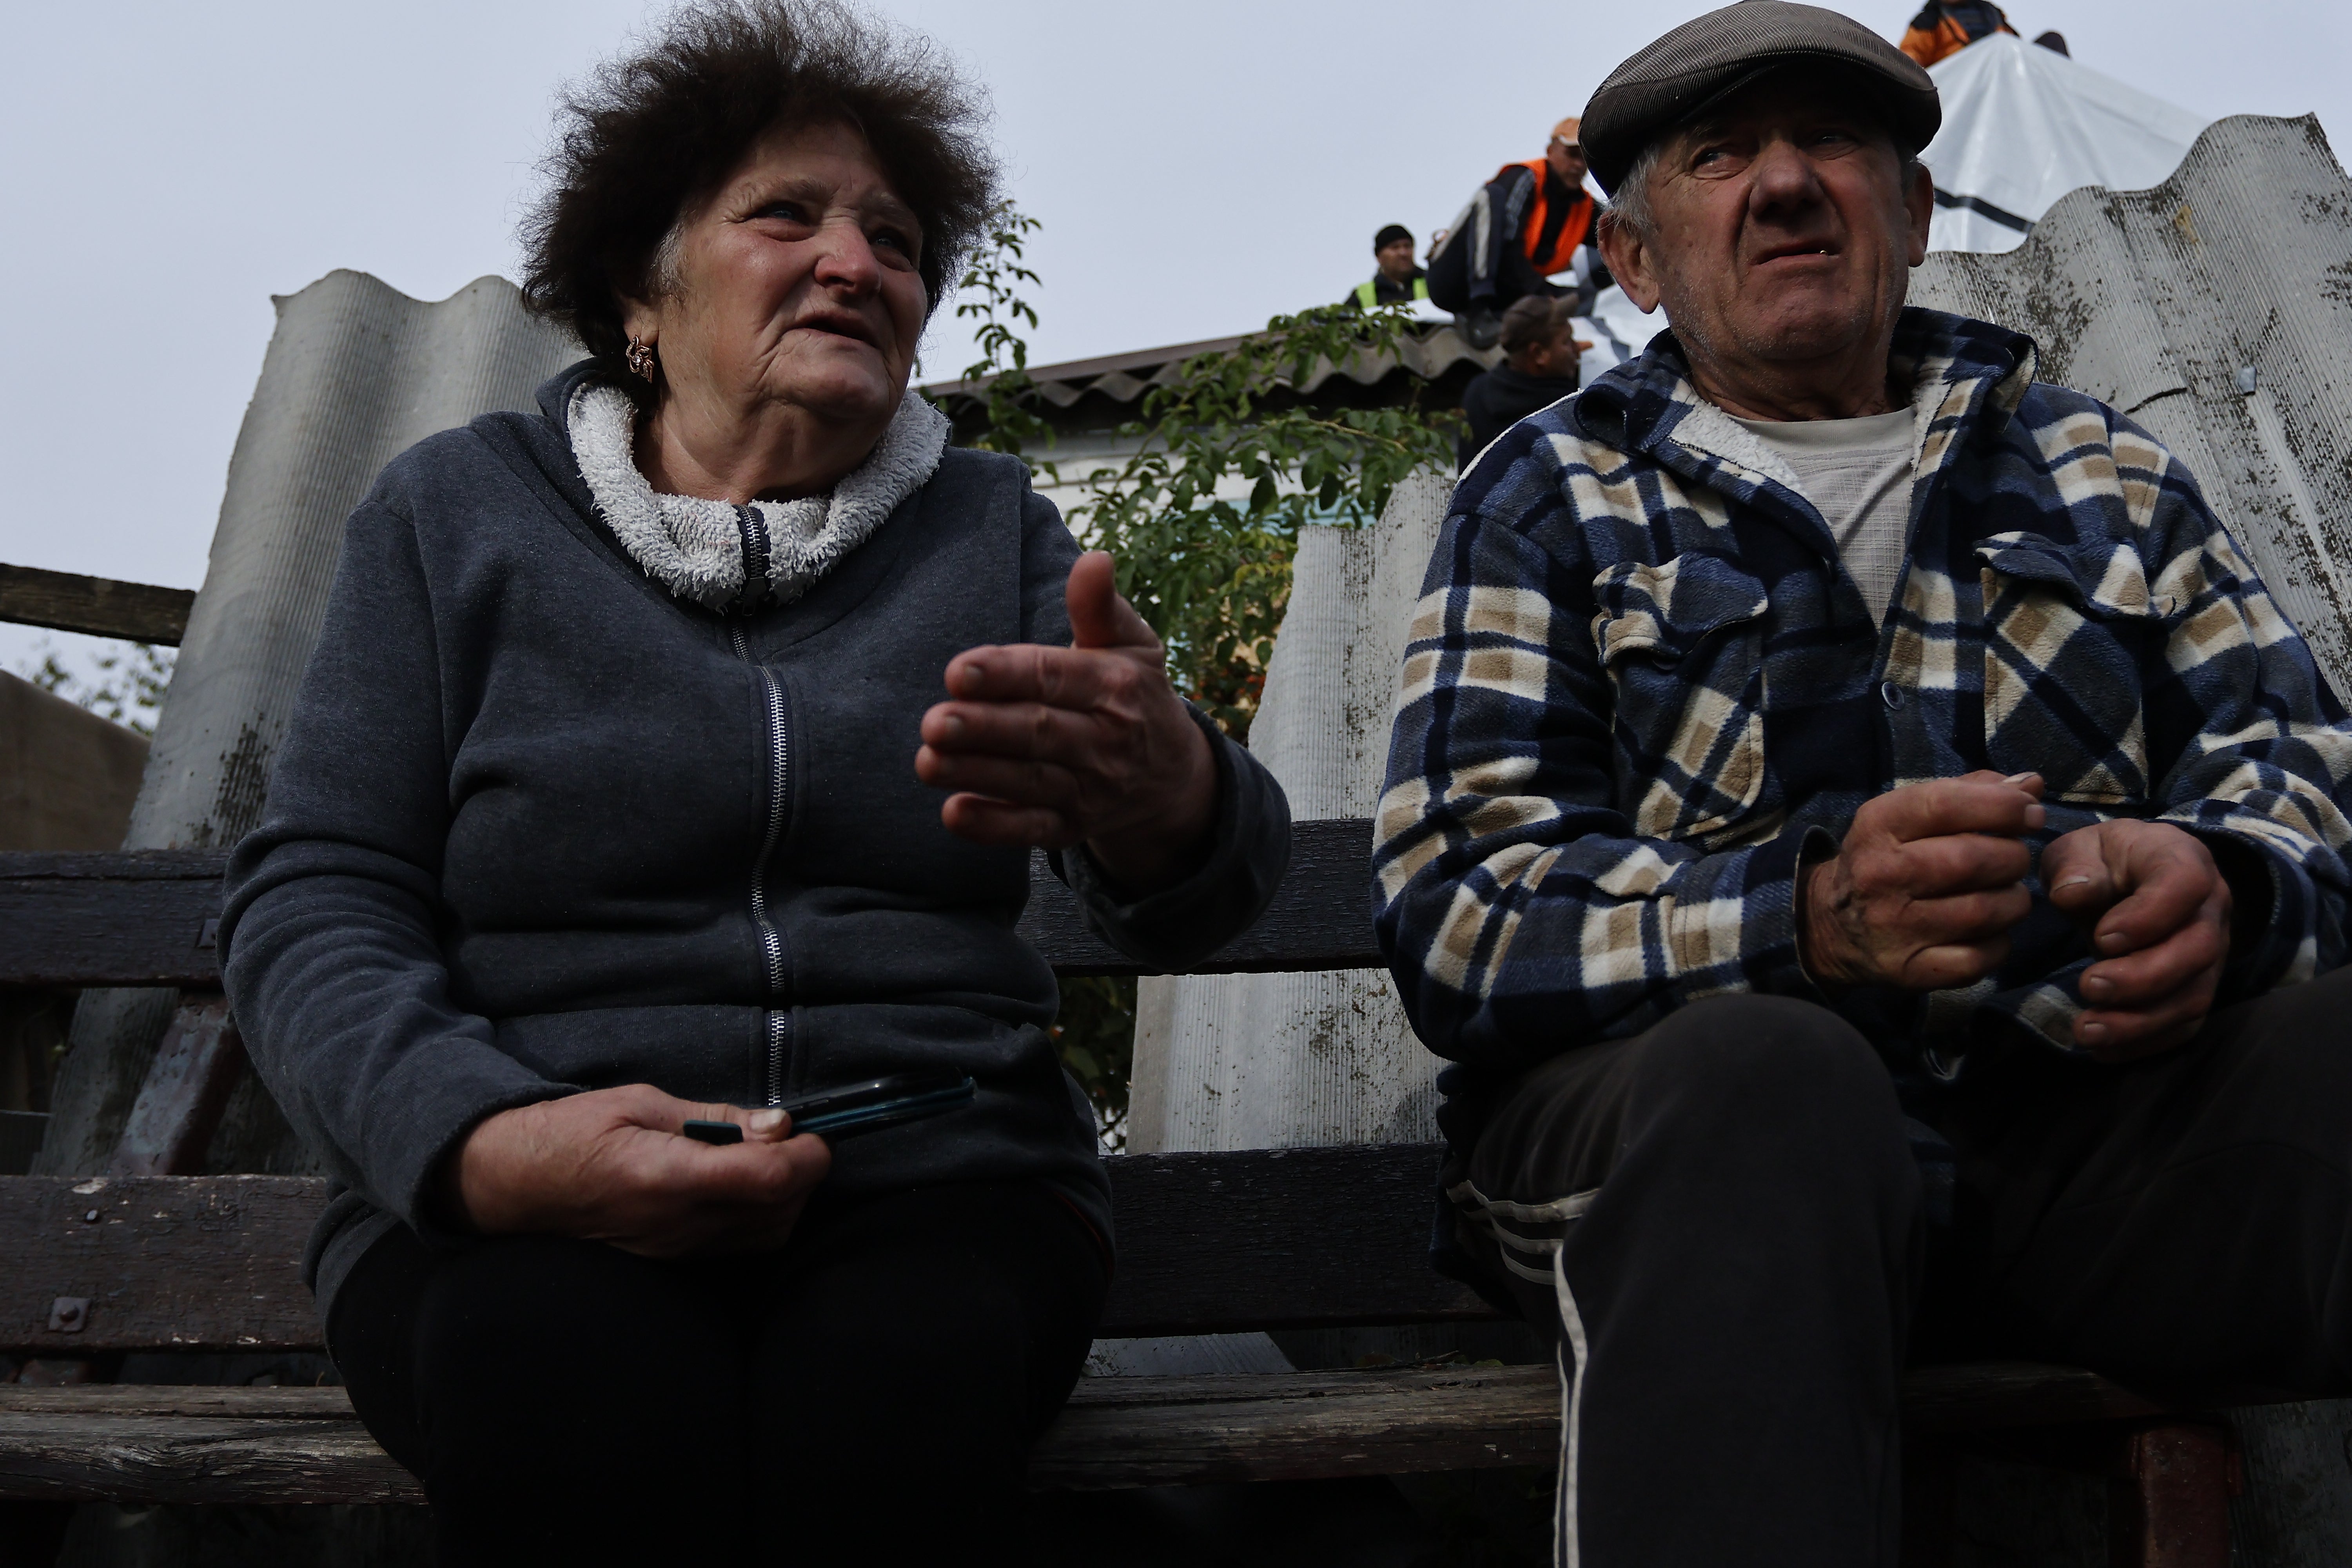 Many of those left in the village are older people